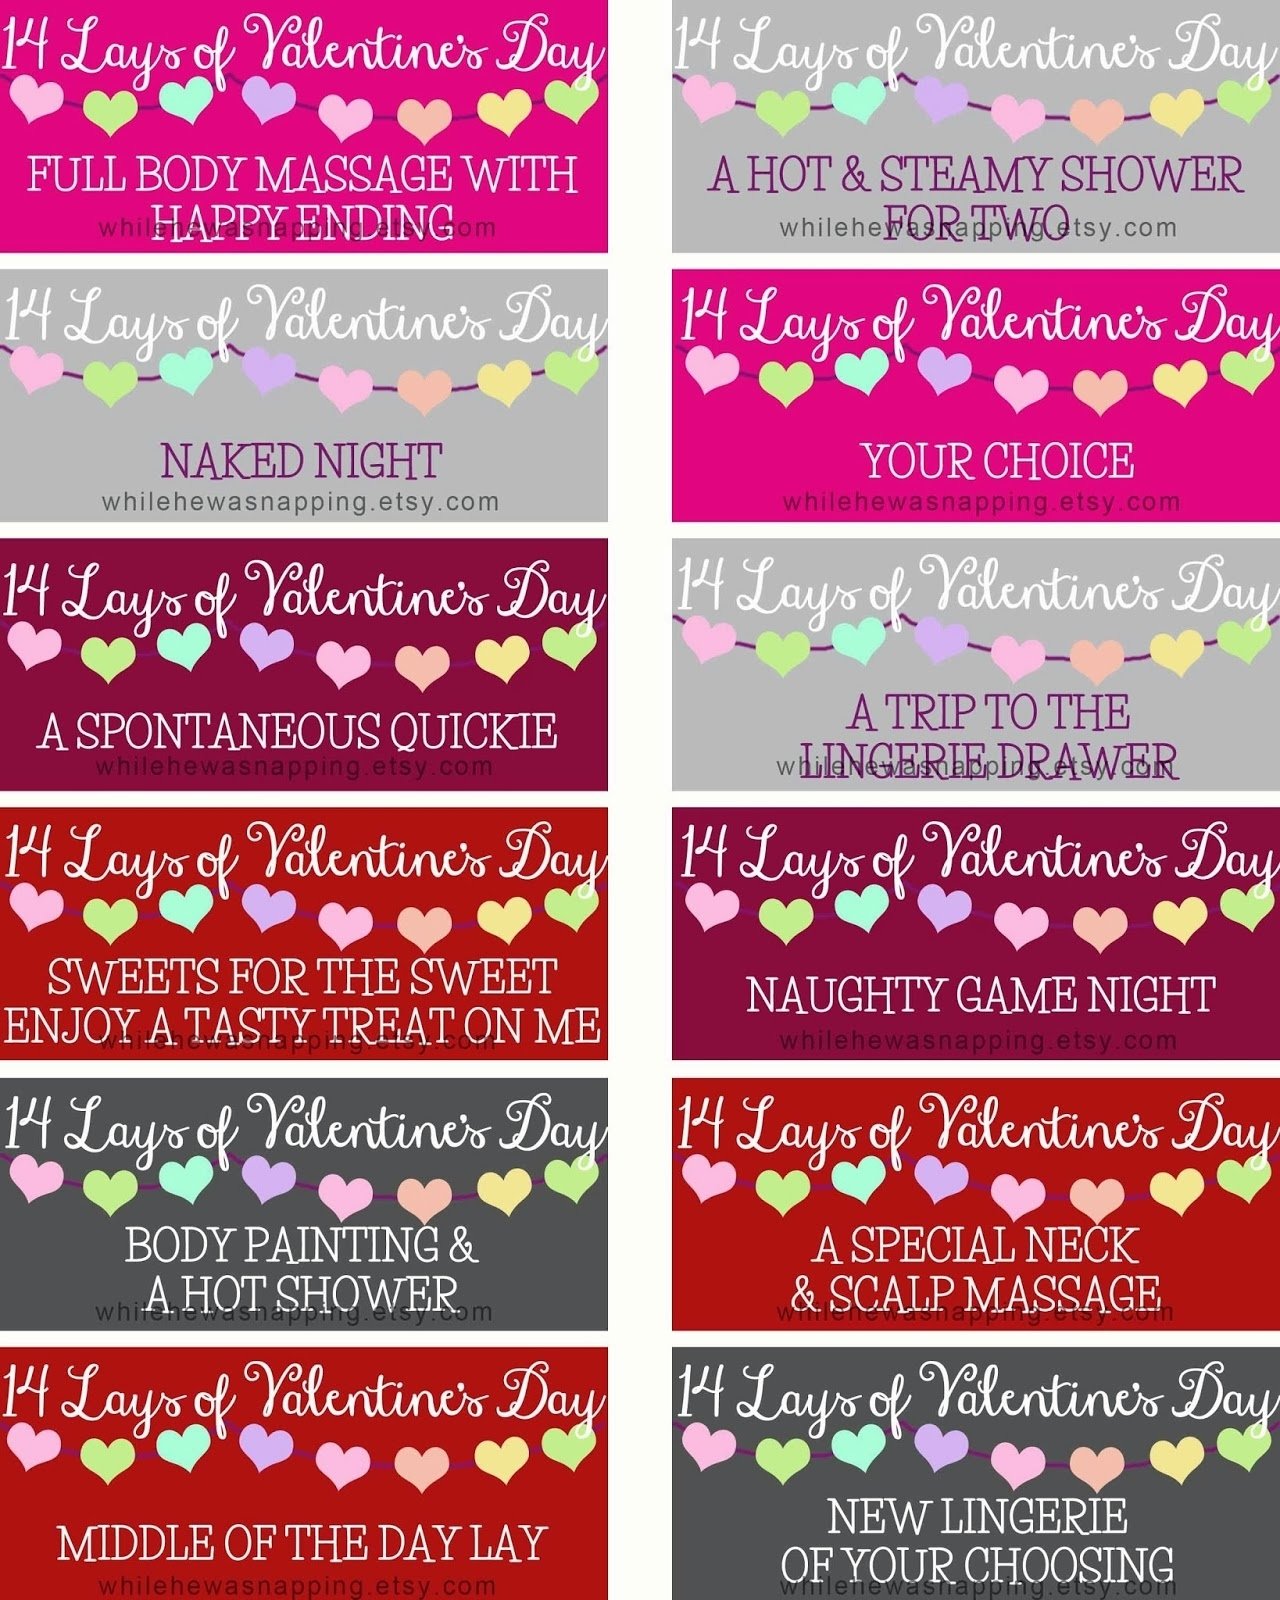 10-perfect-love-coupon-ideas-for-husband-2023